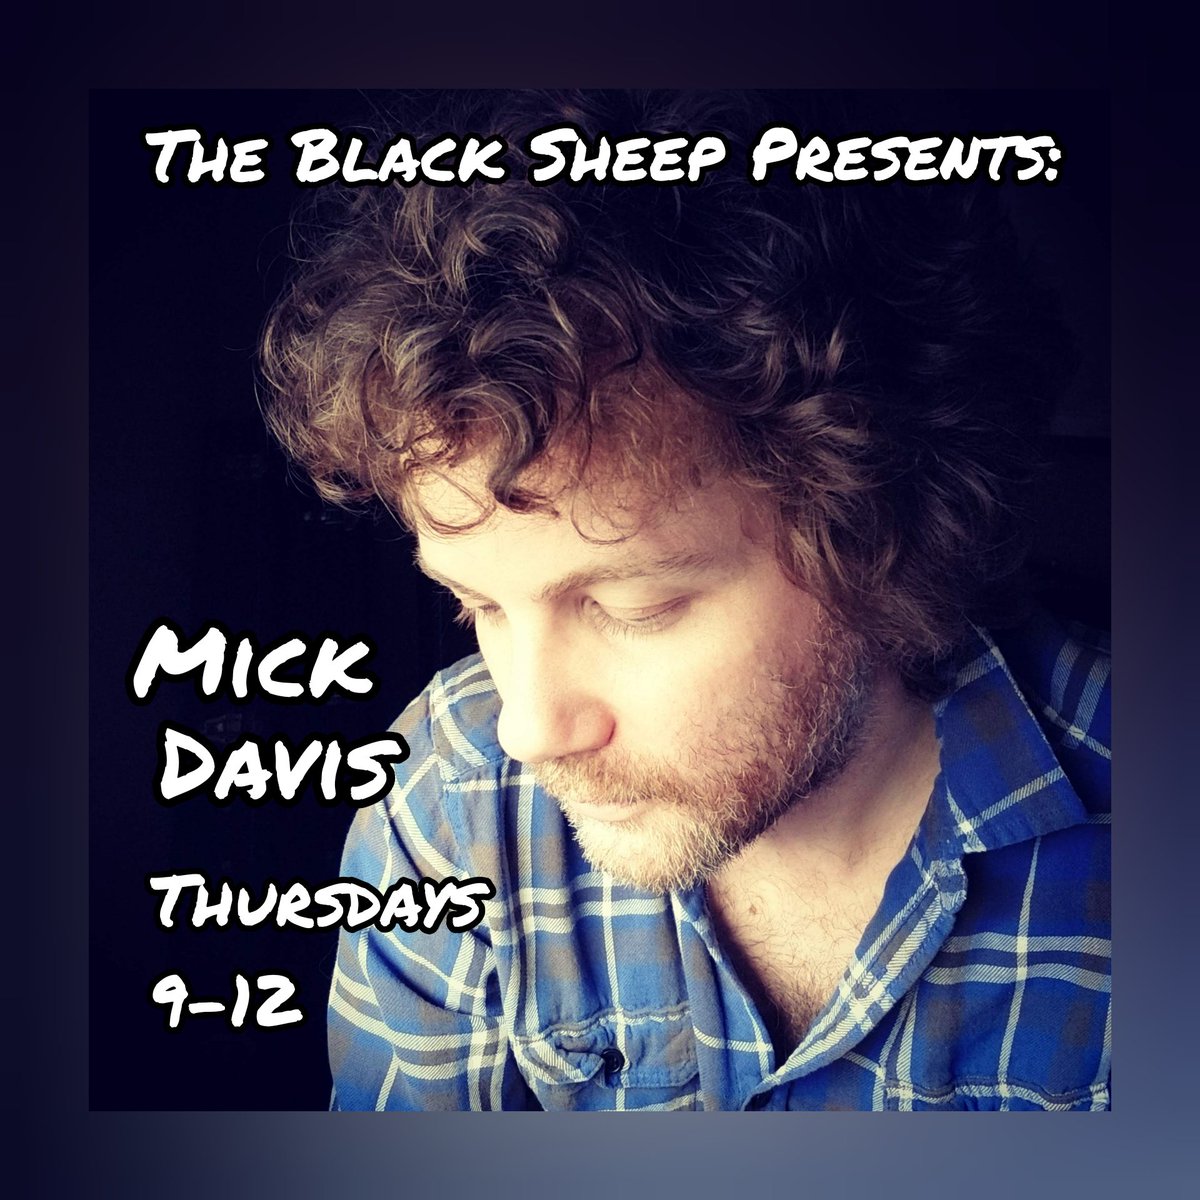 Tonight we have singer/songwriter Mick Davis from 9:00-12:00! Doors open at 8:00 and Corby's Jameson is on special all night!